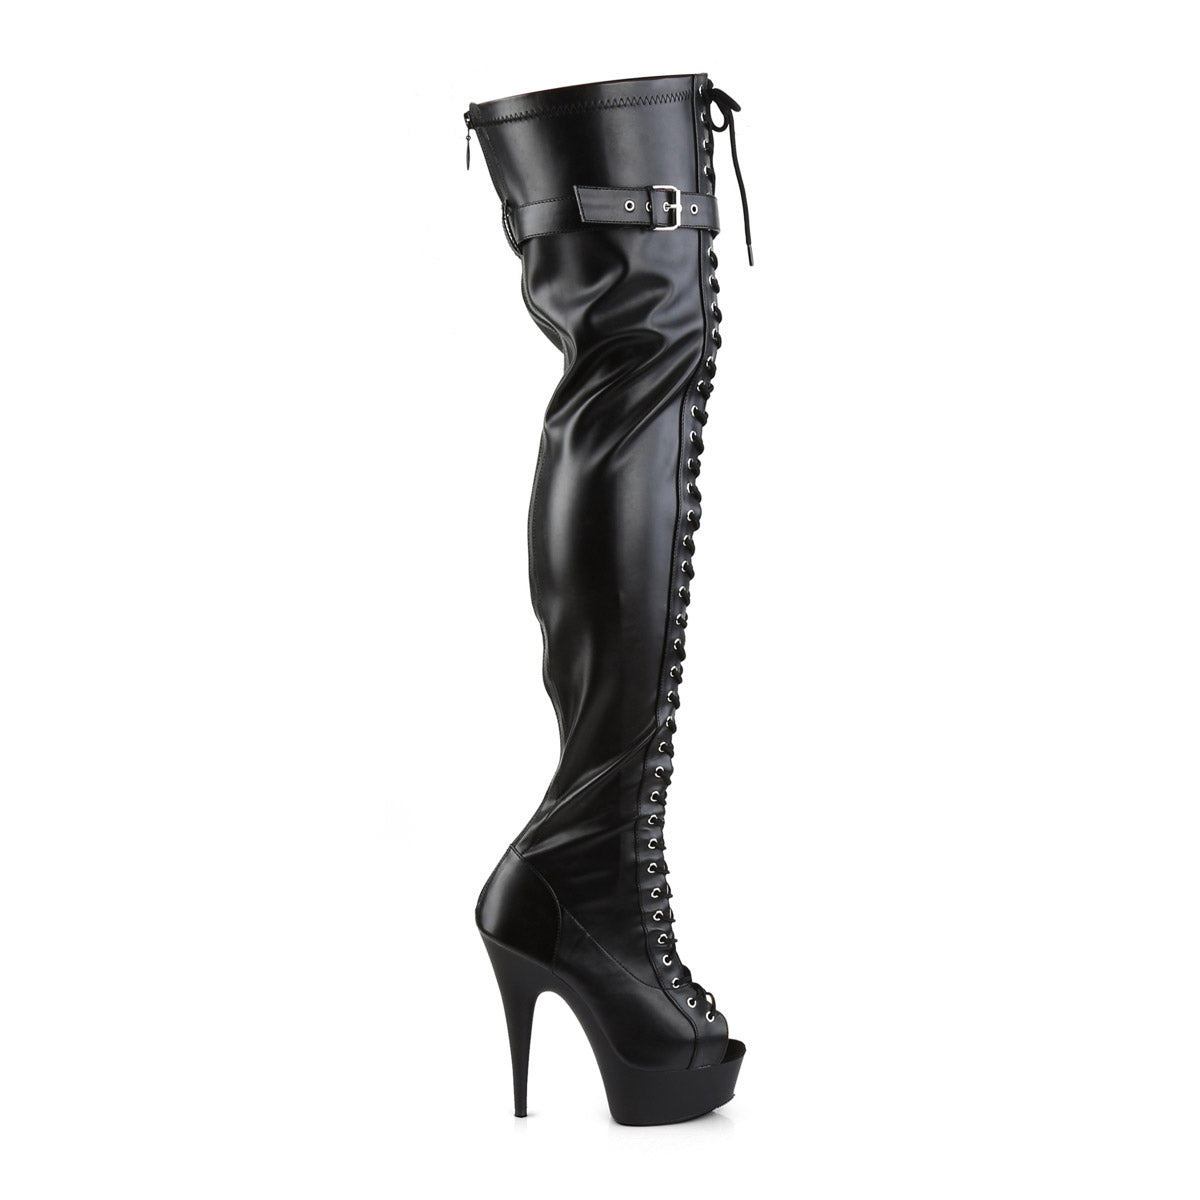 Lace Up Buckle Strap Platform Stiletto Heel Thigh High Boots Shoes Pleaser Pleaser DELIGHT/3025